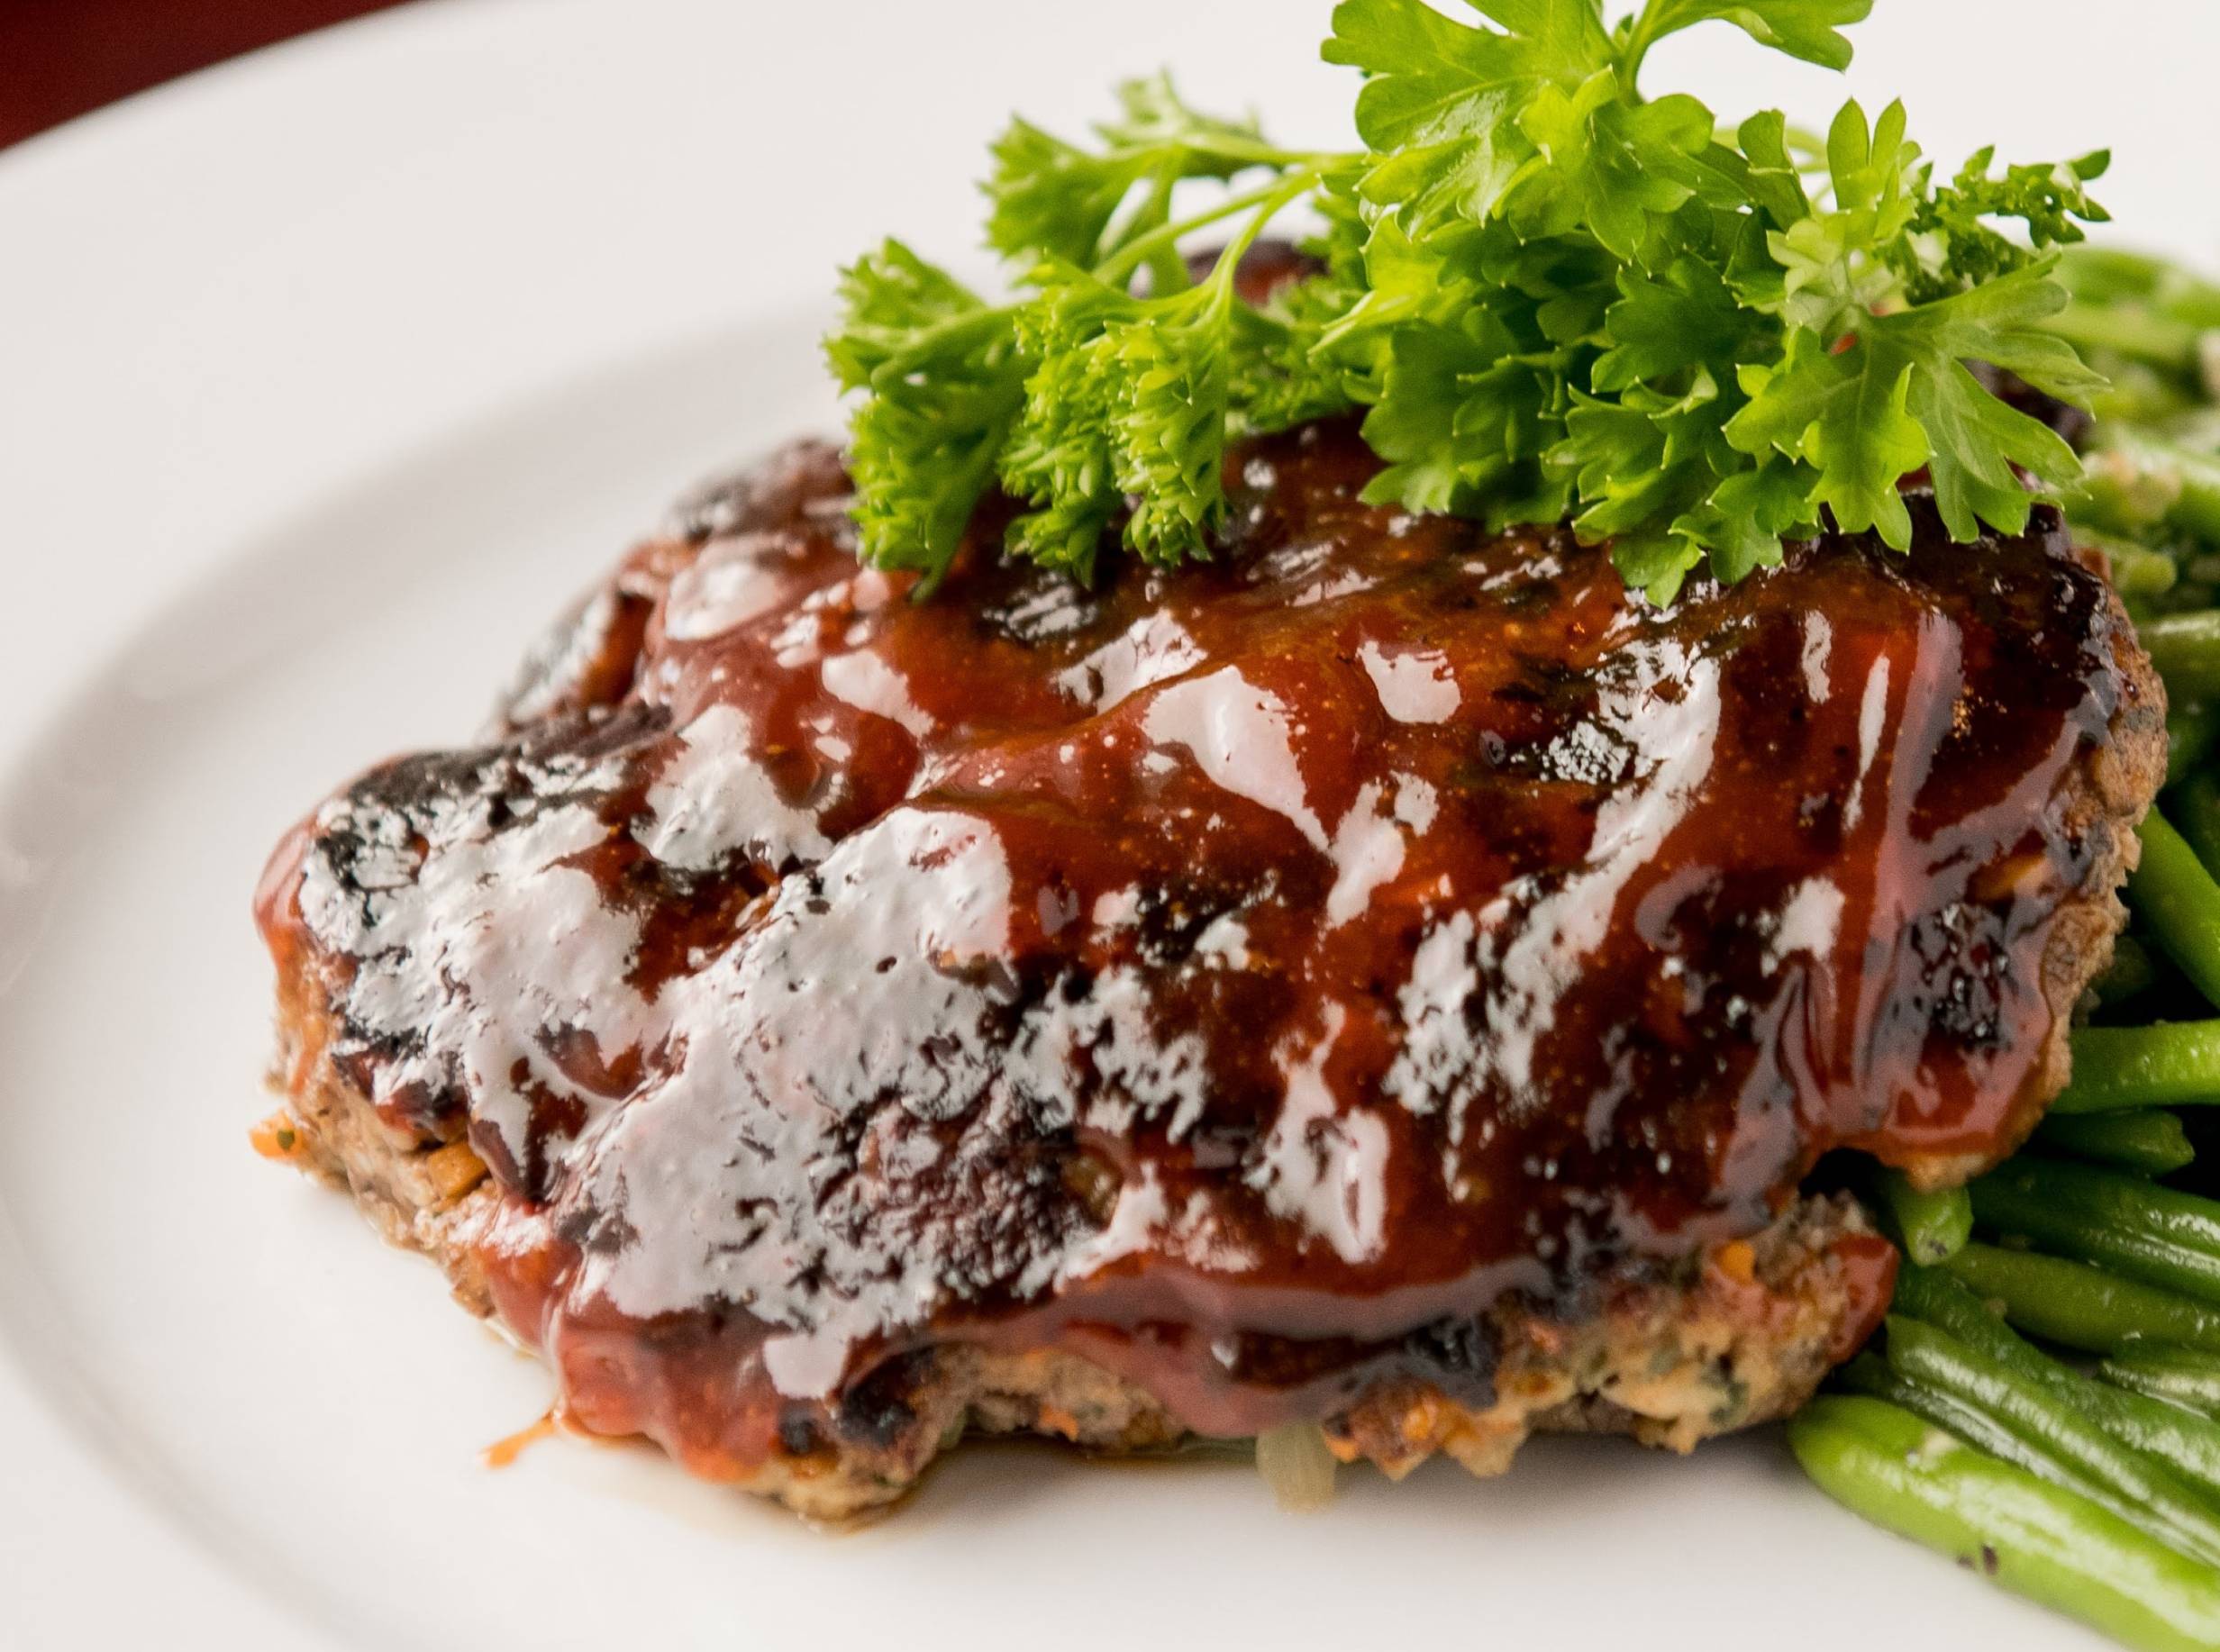 A single-serving, made-to-order meatloaf is placed on a round, white plate. A layer of zesty sauce and a sprig of fresh parsley top the meatloaf, which itself partially sits on a bed of fresh garlic green beans, cooked tender crisp, and roasted red potatoes. Photo by Hamilton Walkerâ€™s. 